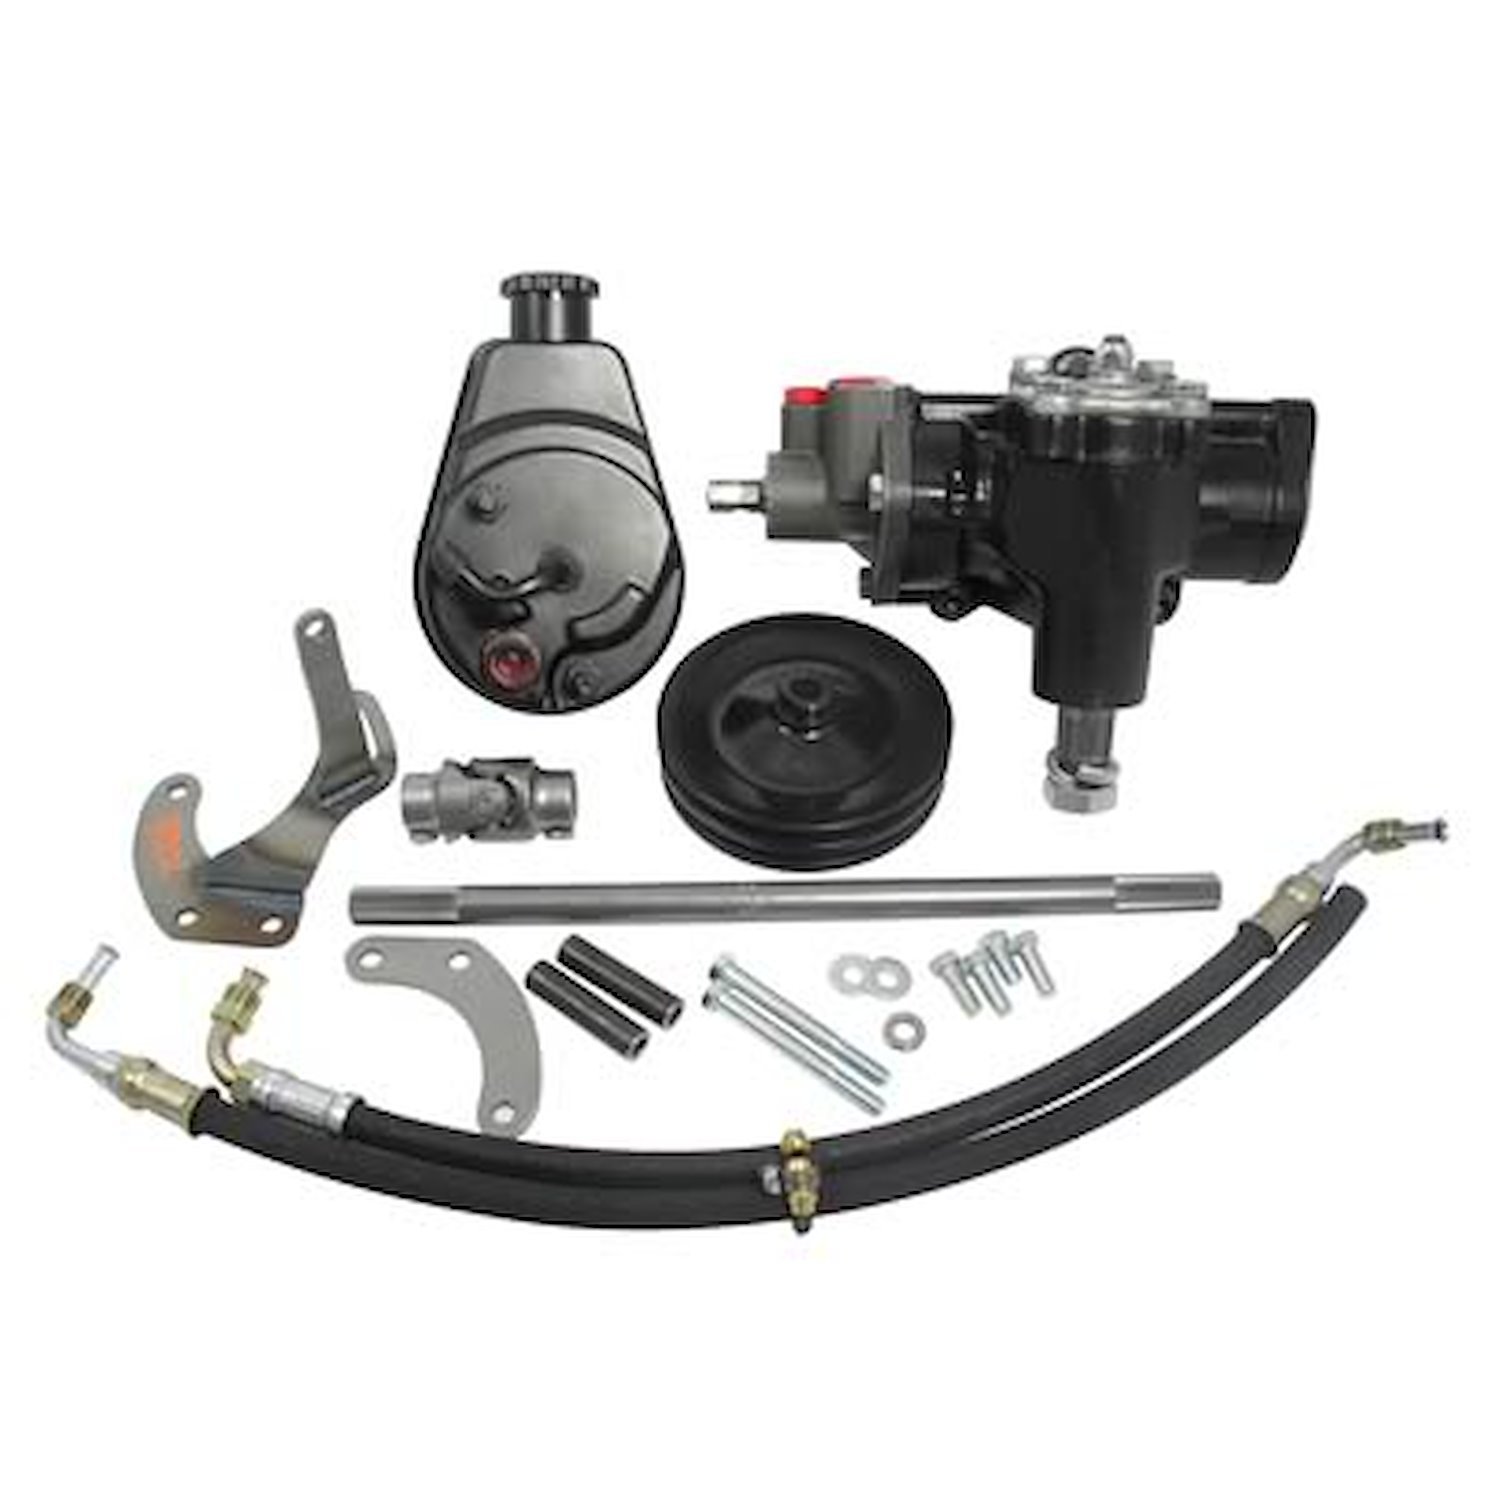 Complete Power Steering Conversion Kit 1958-64 Chevy with Small Block & Short Water Pump